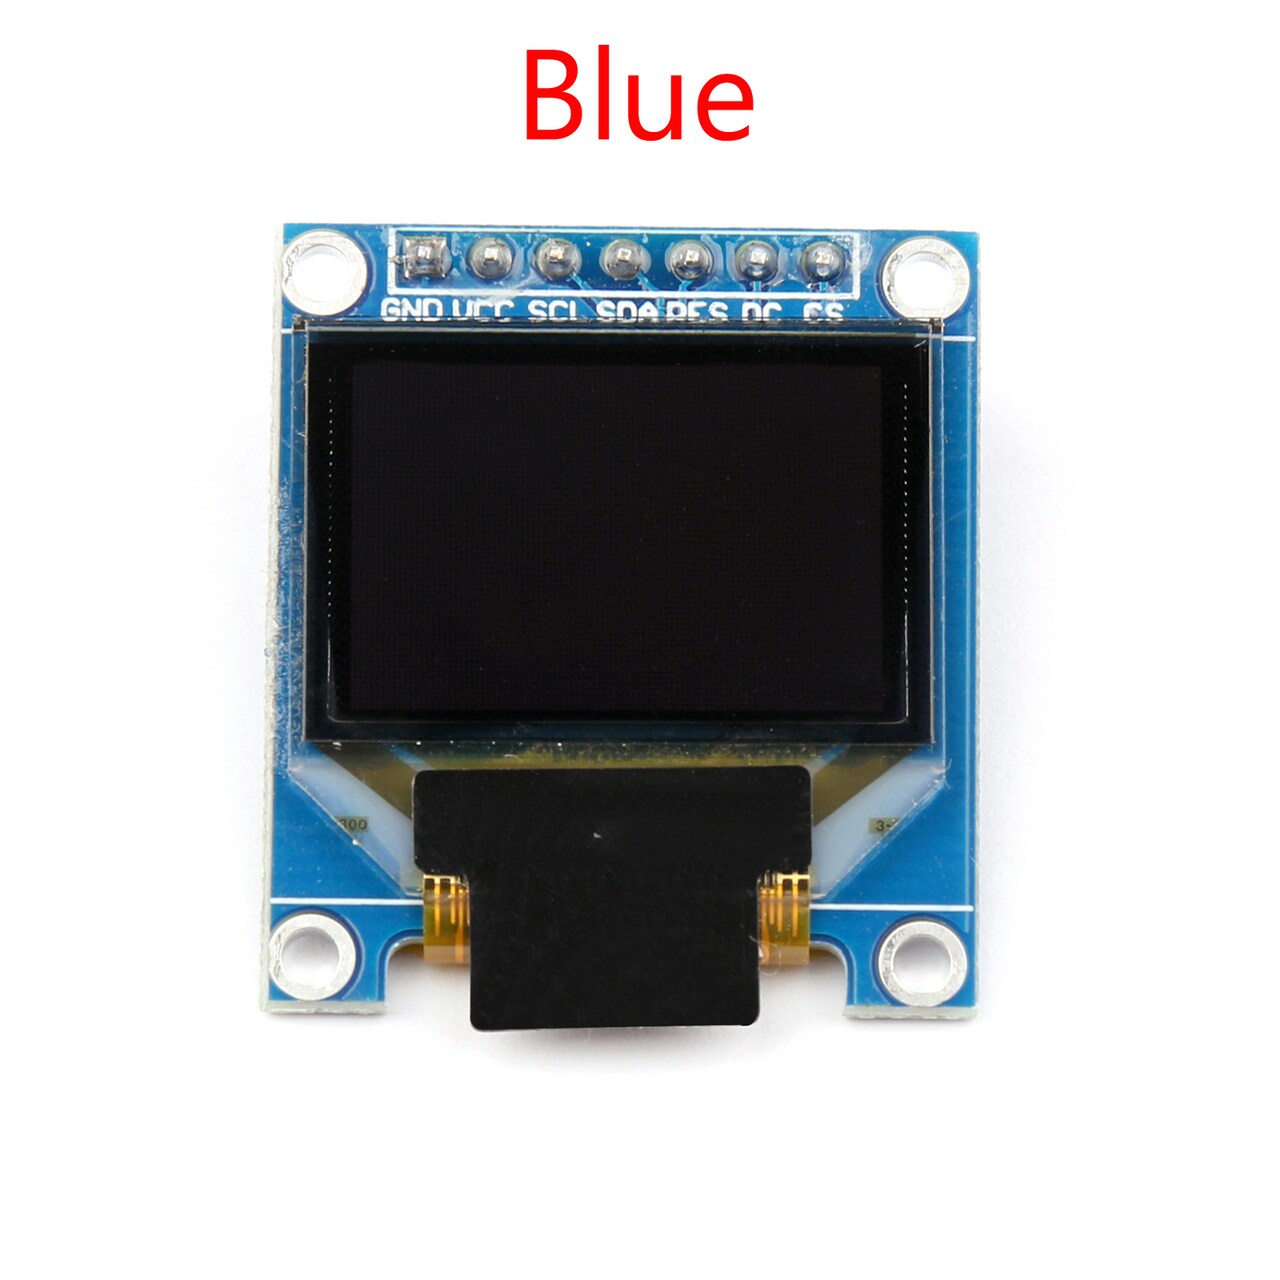 0.96" I2C IIC Serial 128X64 128*64 OLED LCD LED Blue Display for Arduino STM32